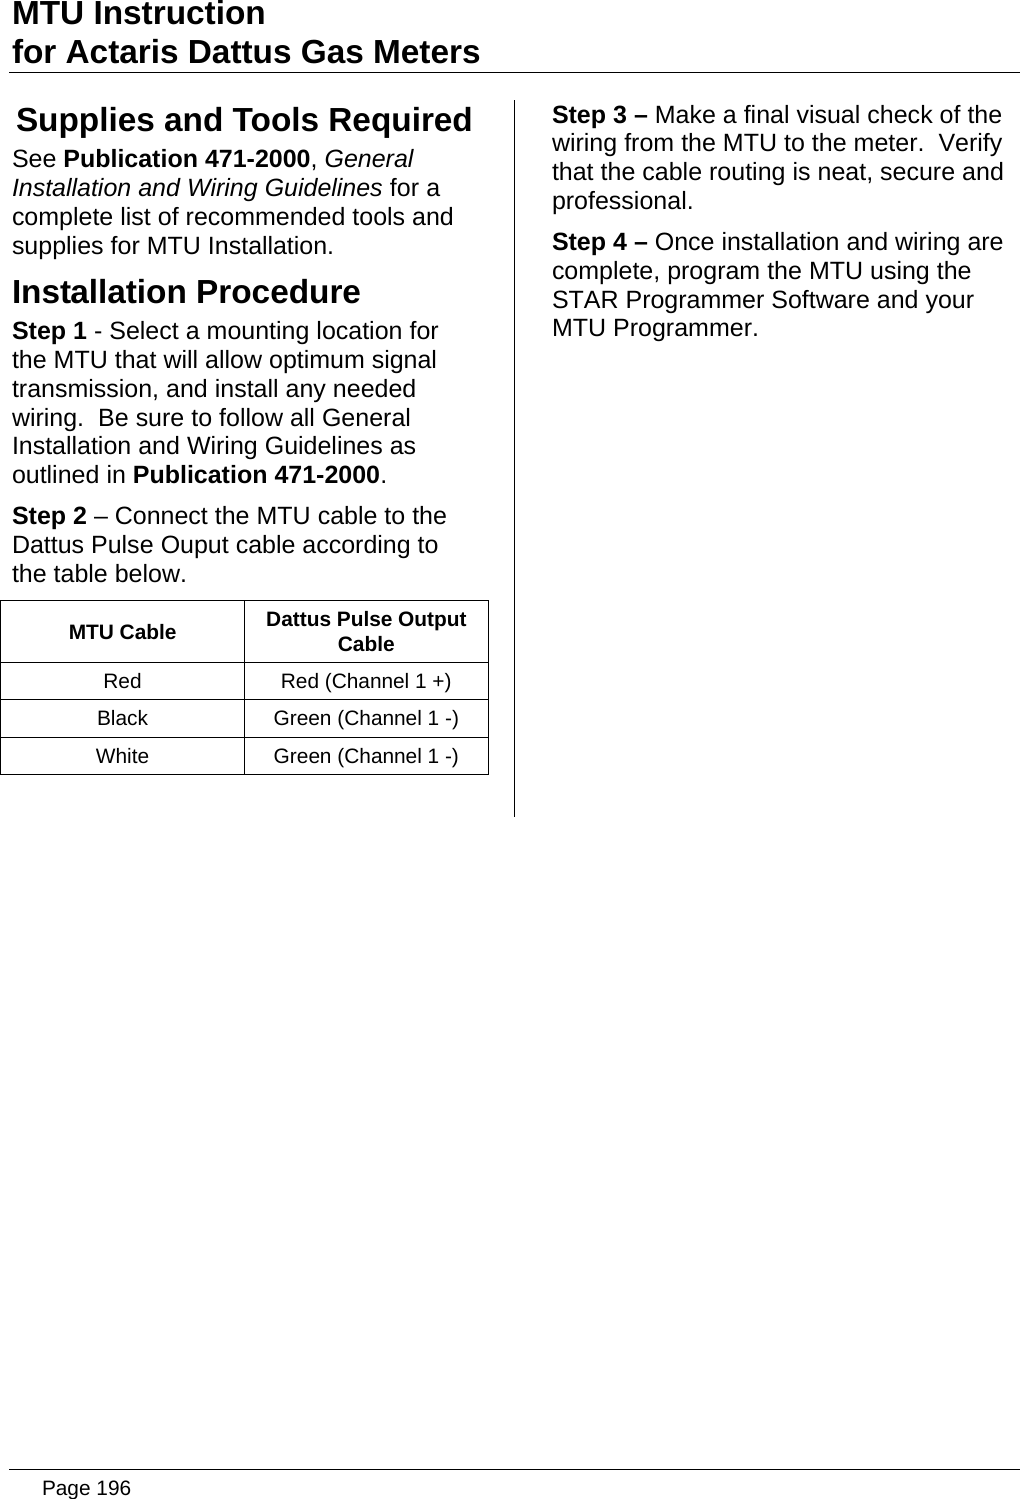 MTU Instruction for Actaris Dattus Gas Meters Supplies and Tools Required See Publication 471-2000, General Installation and Wiring Guidelines for a complete list of recommended tools and supplies for MTU Installation. Installation Procedure Step 1 - Select a mounting location for the MTU that will allow optimum signal transmission, and install any needed wiring.  Be sure to follow all General Installation and Wiring Guidelines as outlined in Publication 471-2000. Step 2 – Connect the MTU cable to the Dattus Pulse Ouput cable according to the table below. MTU Cable  Dattus Pulse Output Cable Red  Red (Channel 1 +) Black  Green (Channel 1 -) White  Green (Channel 1 -)  Step 3 – Make a final visual check of the wiring from the MTU to the meter.  Verify that the cable routing is neat, secure and professional. Step 4 – Once installation and wiring are complete, program the MTU using the STAR Programmer Software and your MTU Programmer.   Page 196